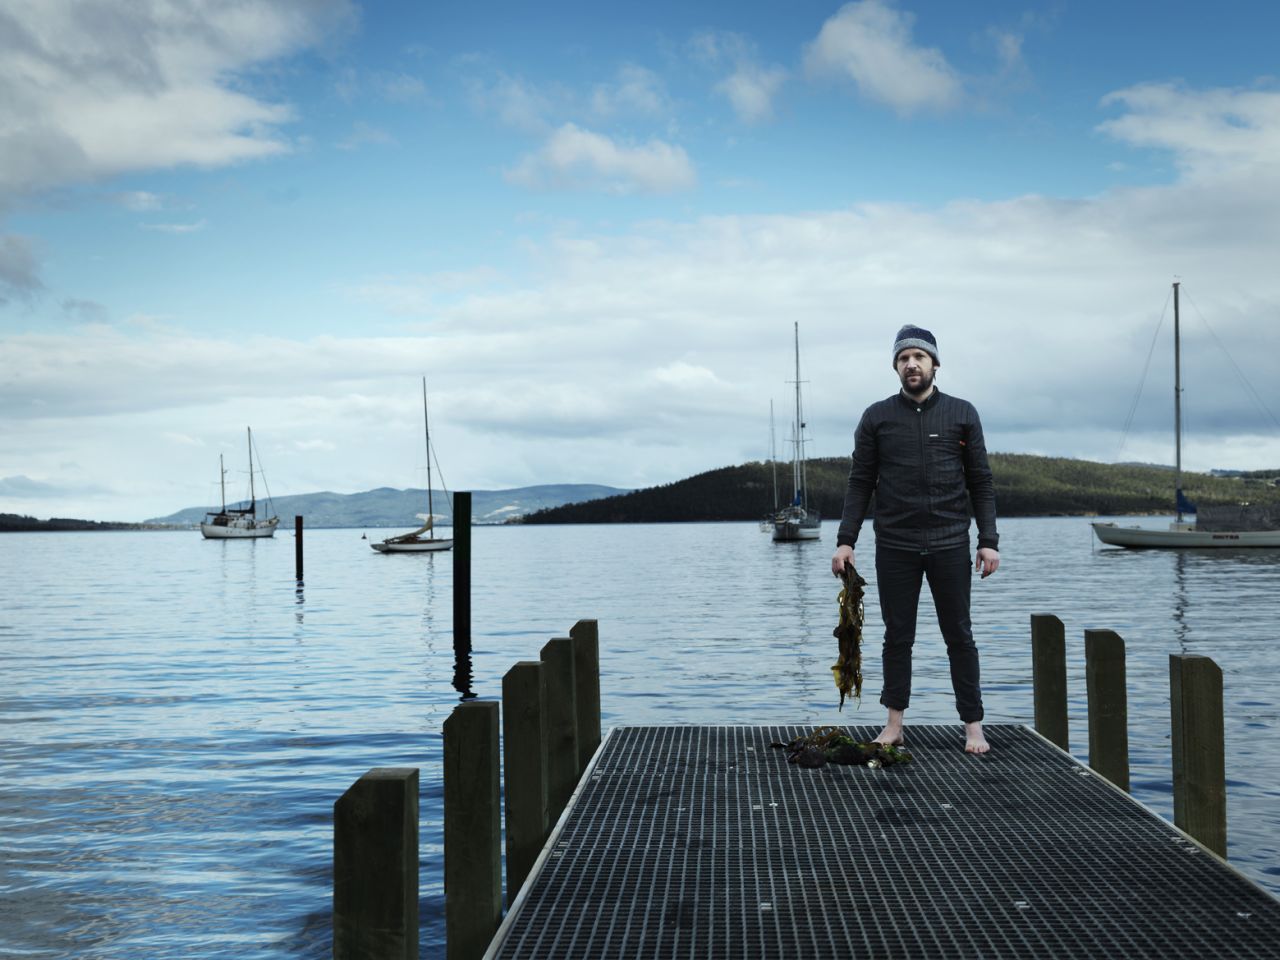 Ever since Noma first topped the World's Best Restaurant list in 2010, scoring a reservation at the restaurant has been all but impossible. The Copenhagen-based restaurant has a 60,000-strong waiting list, and regularly pauses taking reservations when chef Rene Redzepi, pictured, does residencies abroad. His next is in Sydney, Australia for 10 weeks.